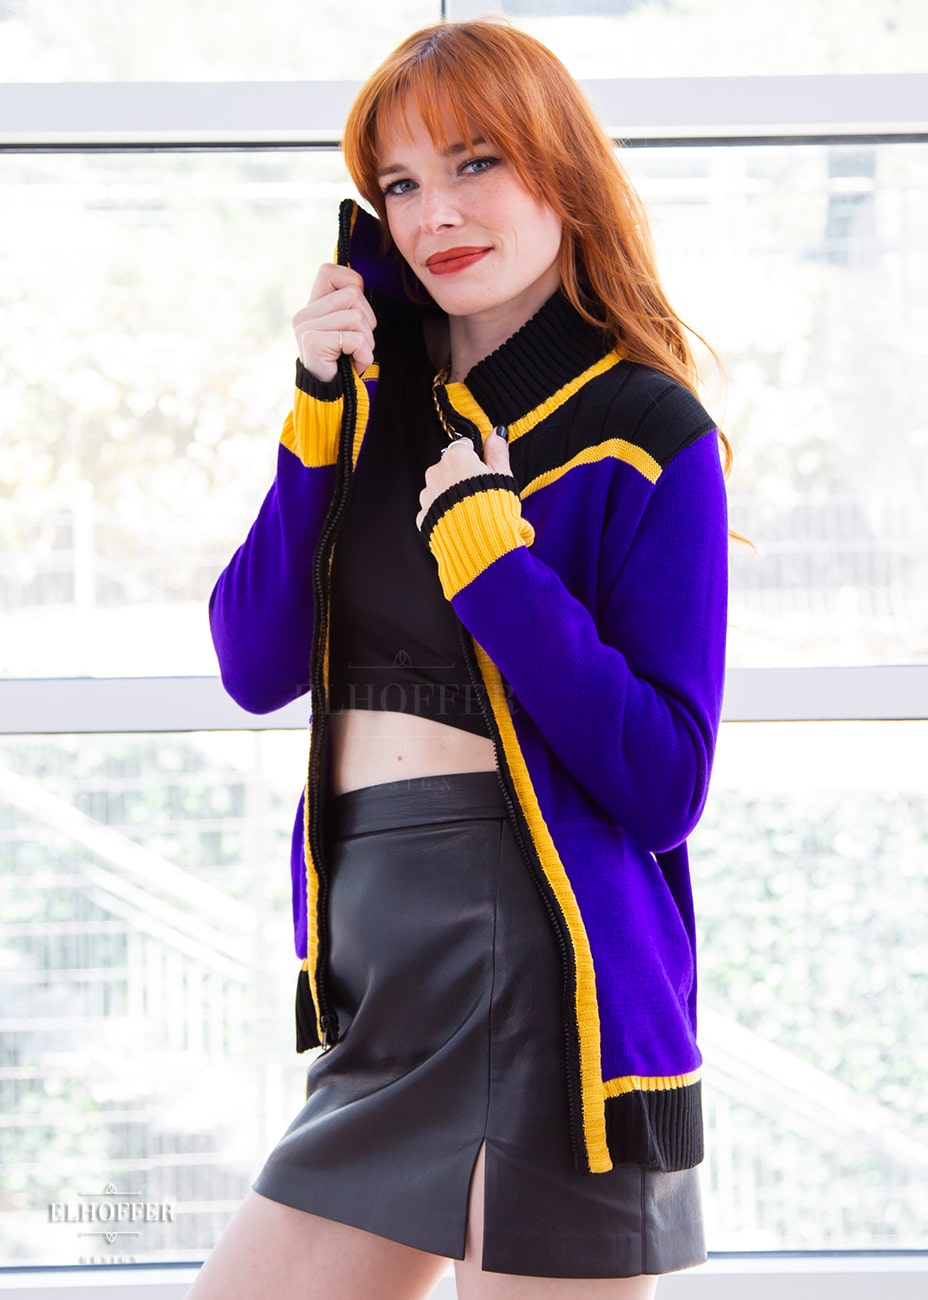 Chloe, a fair skinned XS model with red hair and bangs, is wearing a knit jacket featuring textured sleeves, ribbed kangaroo pockets, a hidden front zipper, and a gorgeous high neckline. The main body of the sweater is bright purple, with black and yellow details.